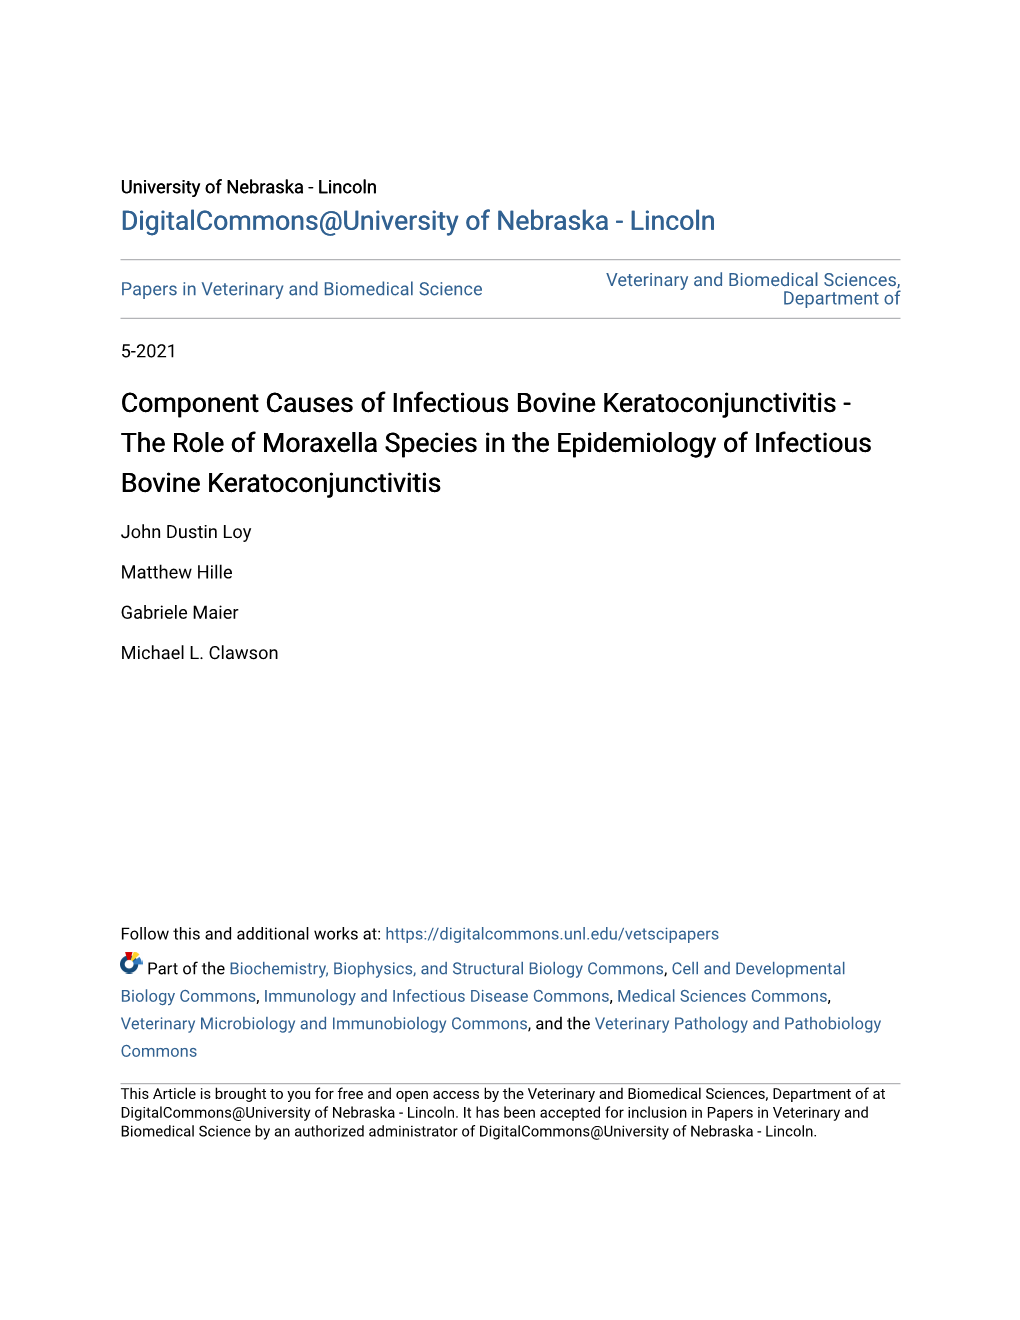 Component Causes of Infectious Bovine Keratoconjunctivitis - the Role of Moraxella Species in the Epidemiology of Infectious Bovine Keratoconjunctivitis